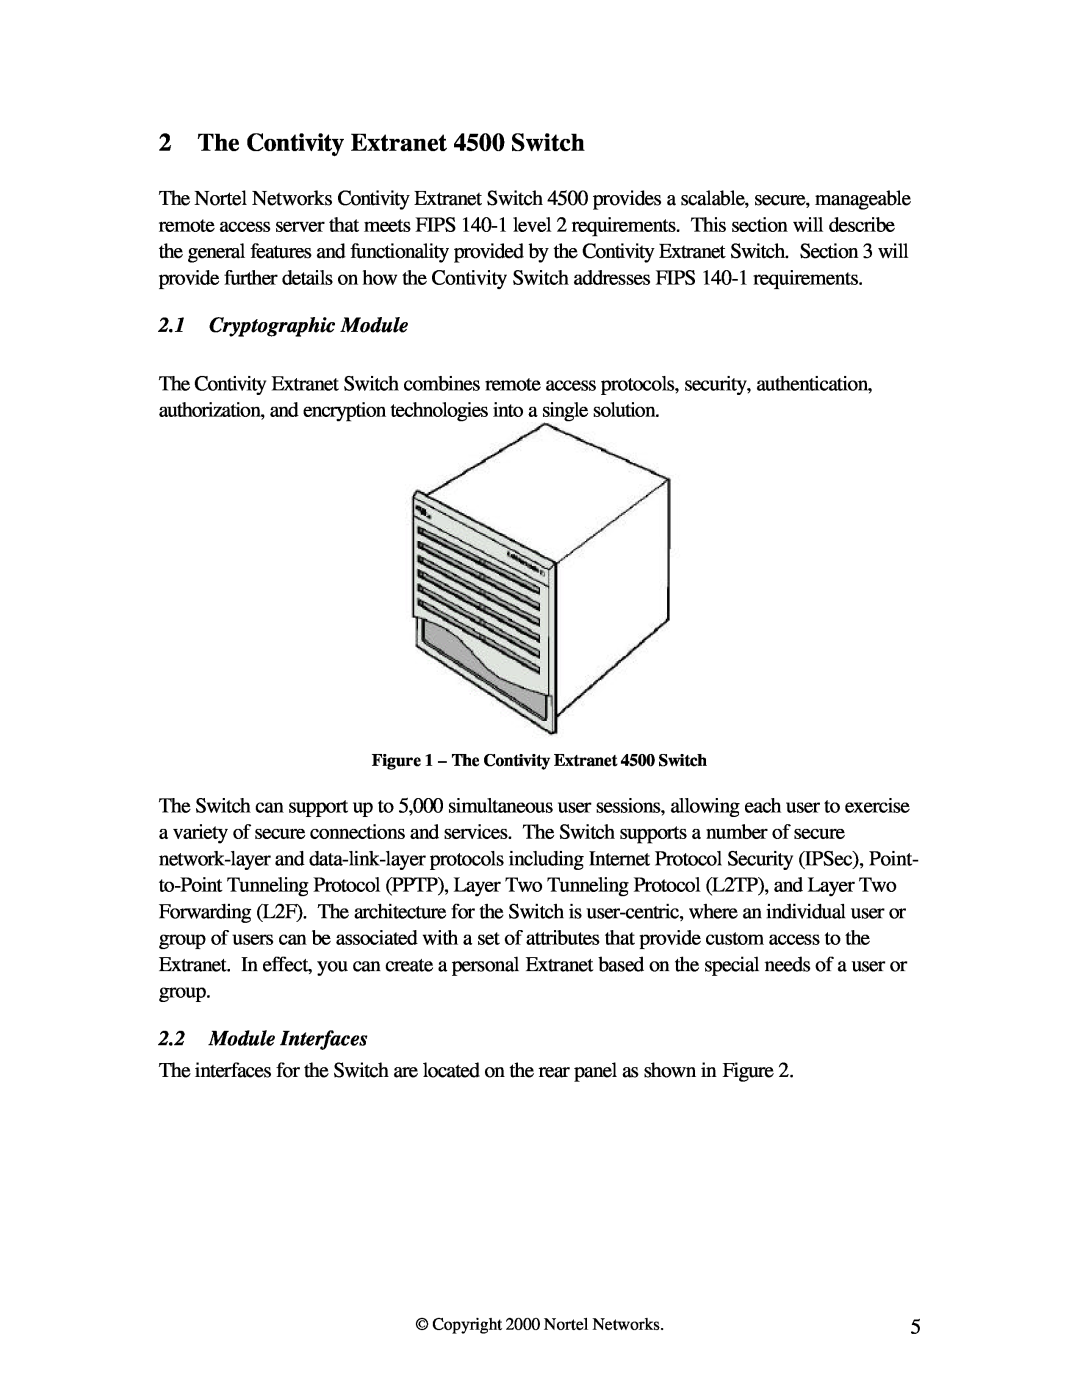 Nortel Networks 4500 FIPS manual The Contivity Extranet 4500 Switch, Cryptographic Module, Module Interfaces 